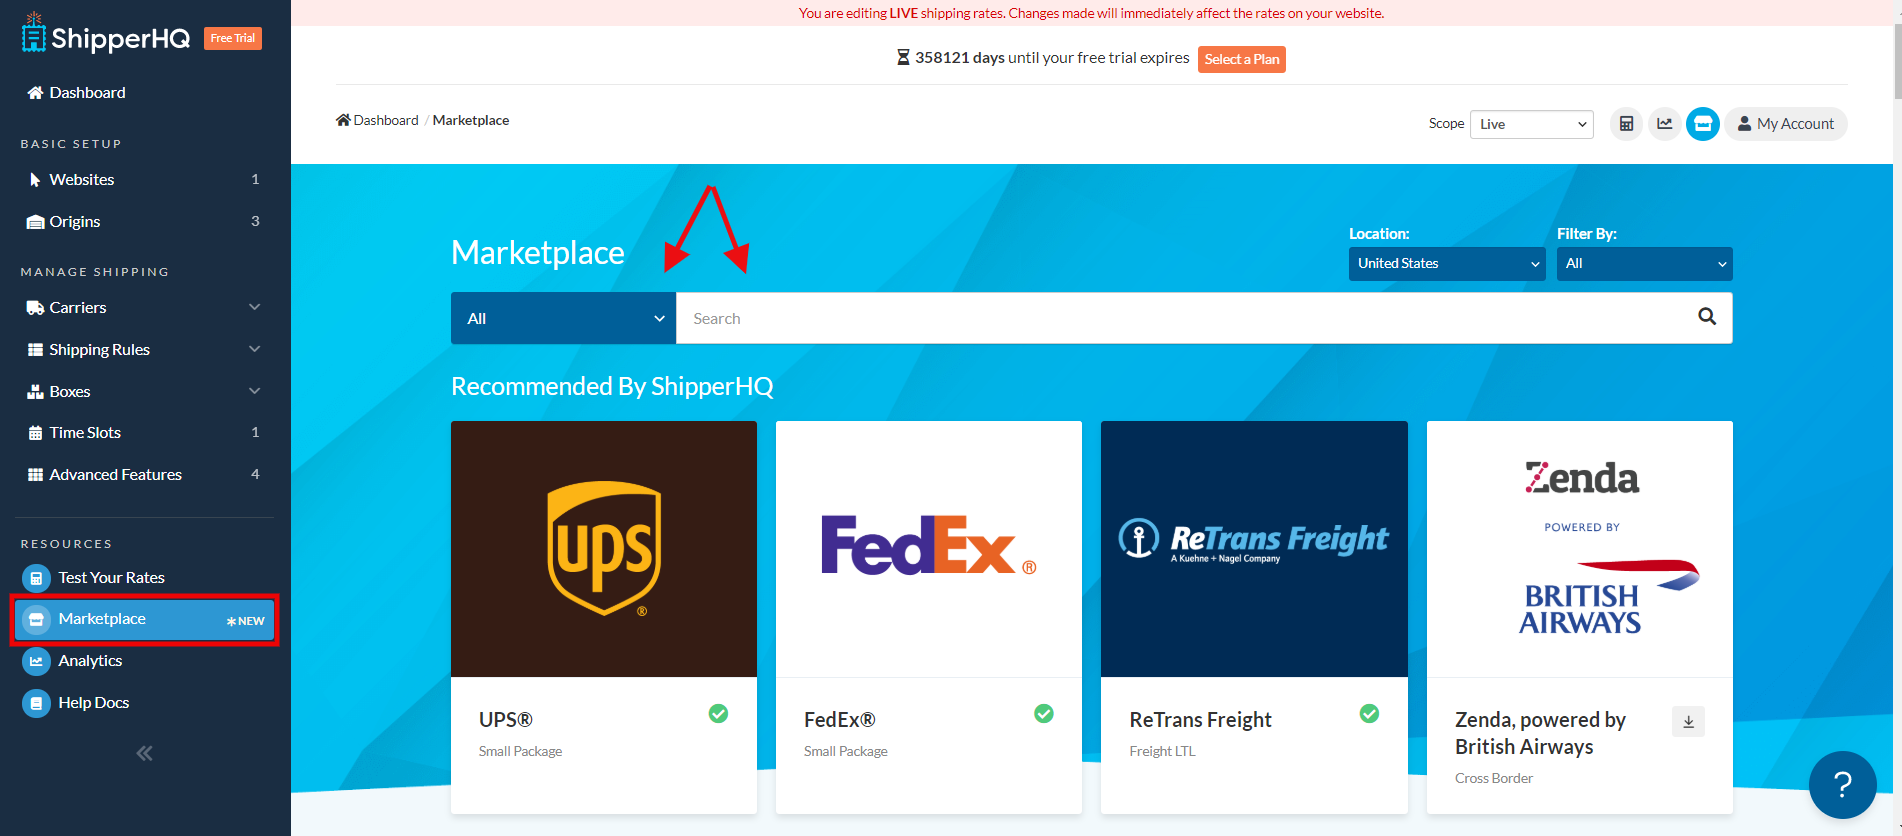 Search ShipperHQ's marketplace to view available carriers.